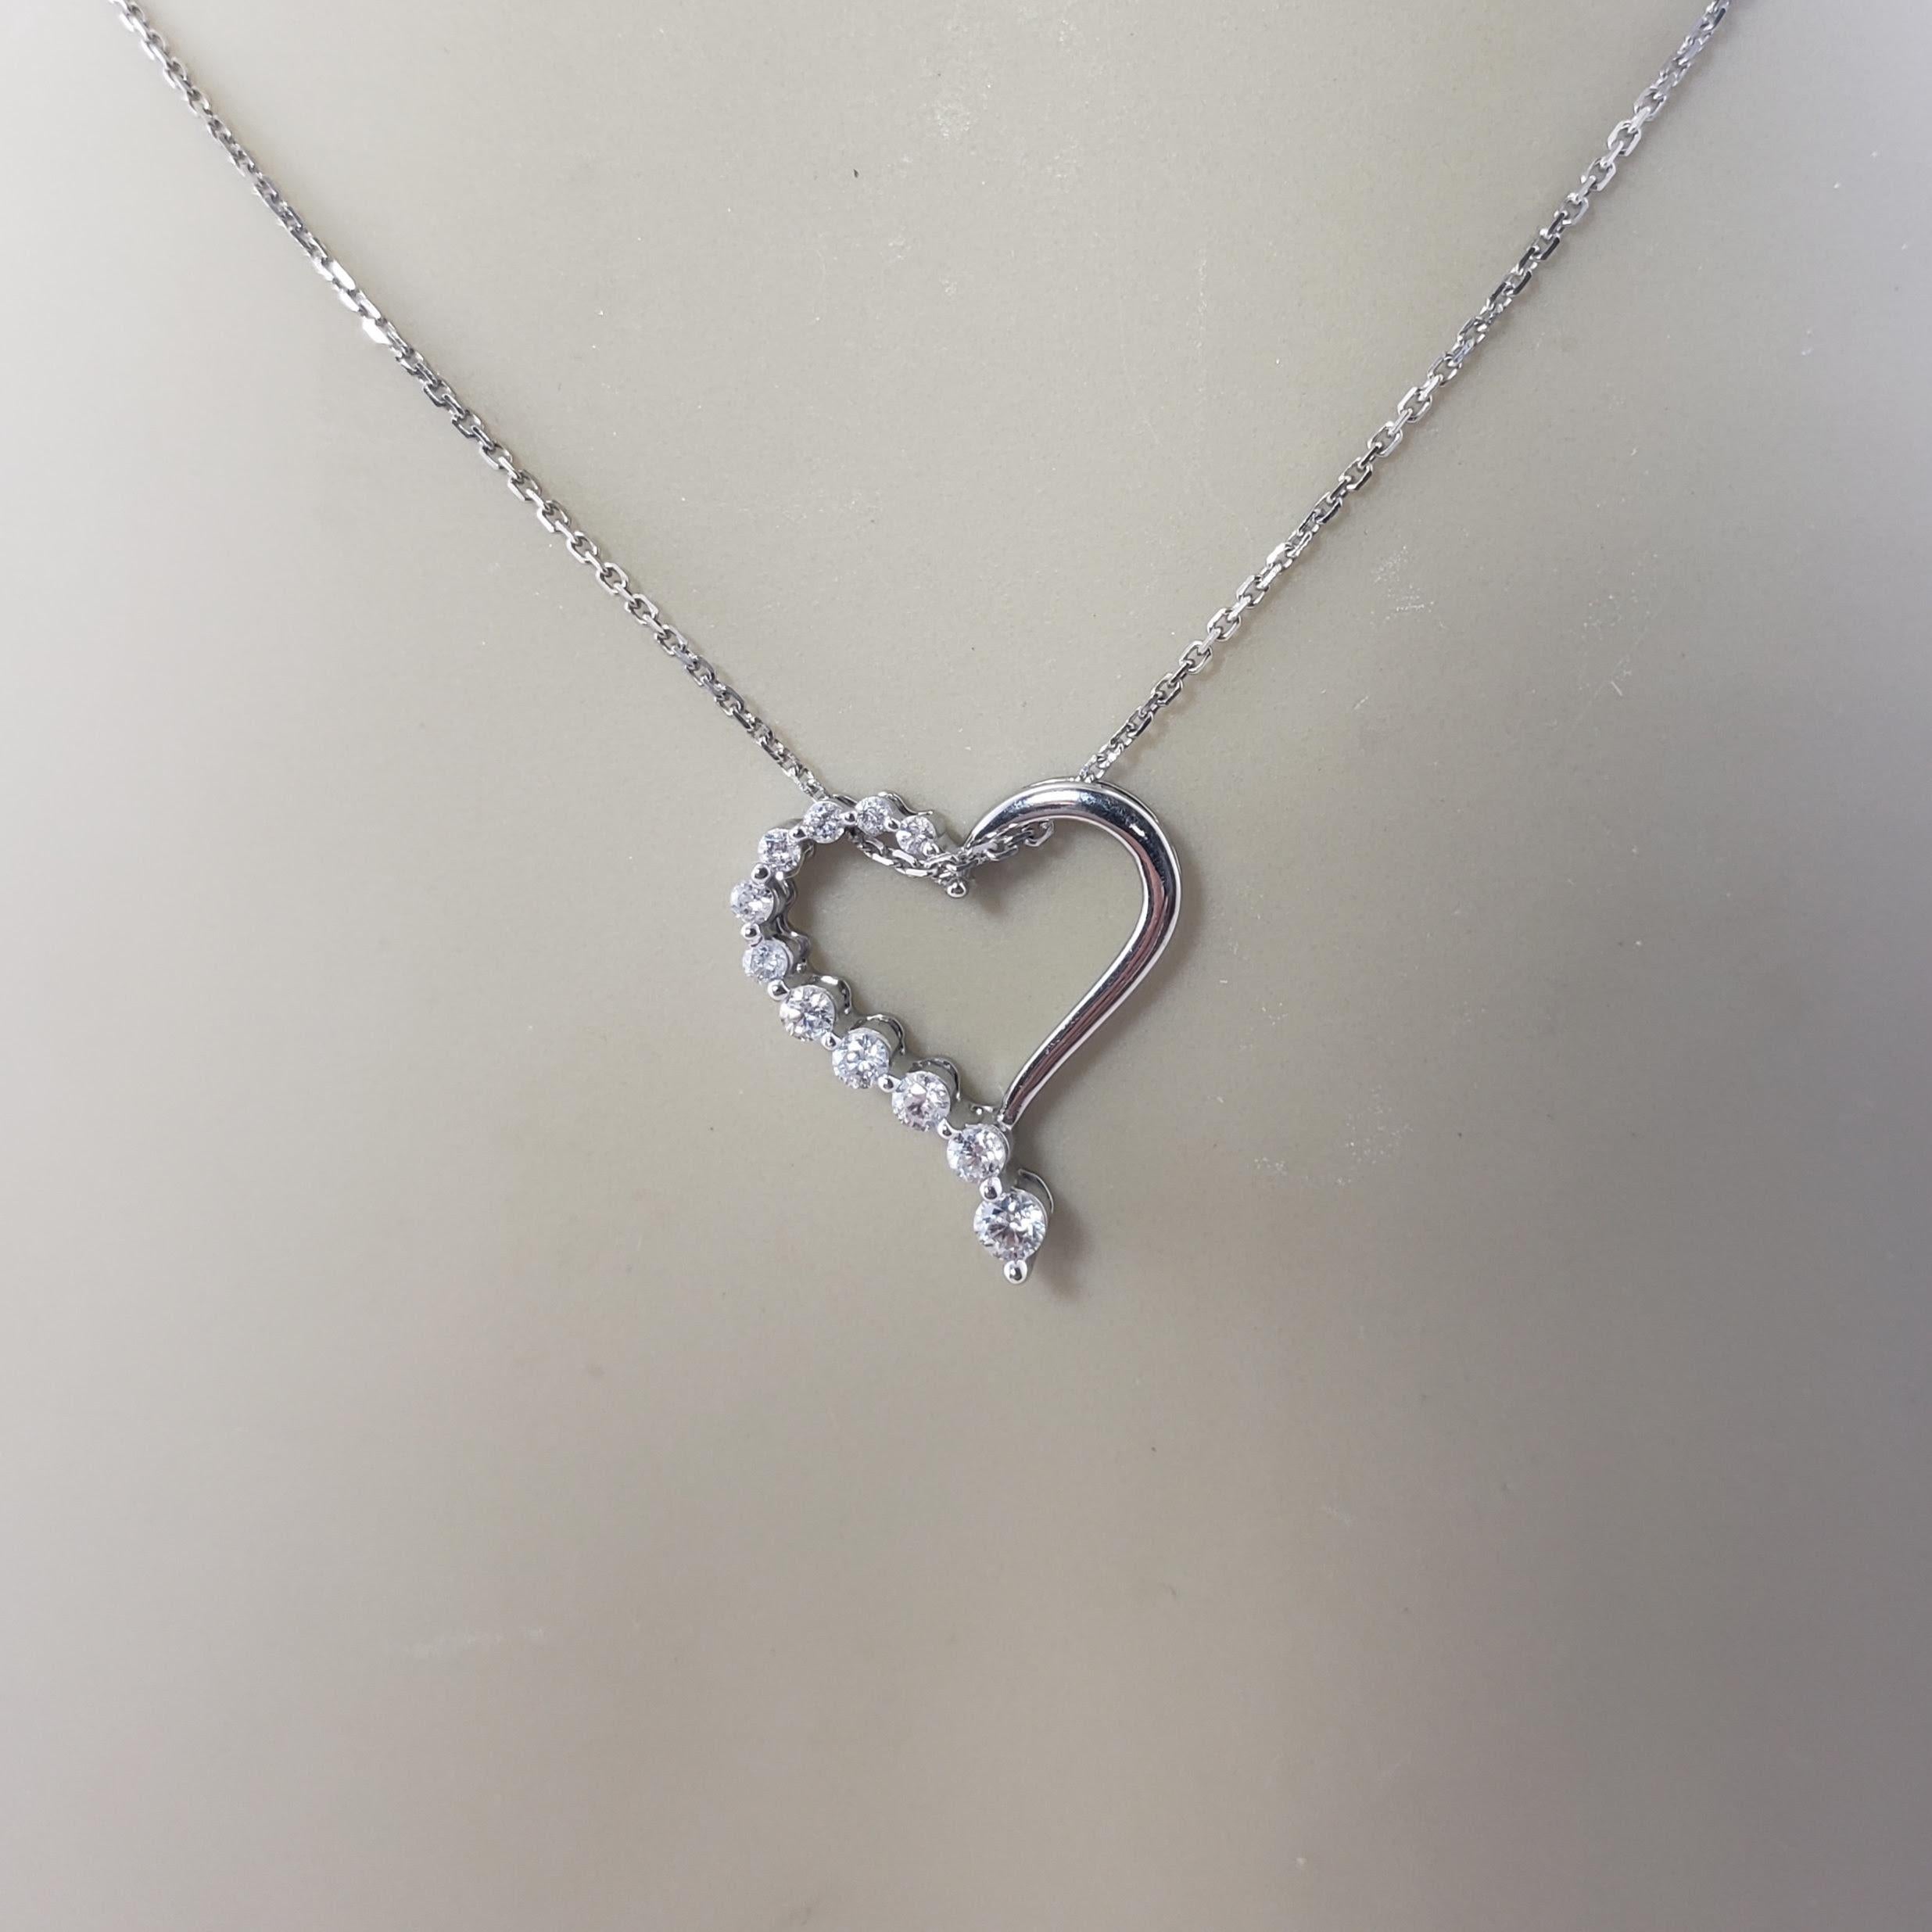 14 Karat White Gold and Diamond Heart Pendant Necklace For Sale 3